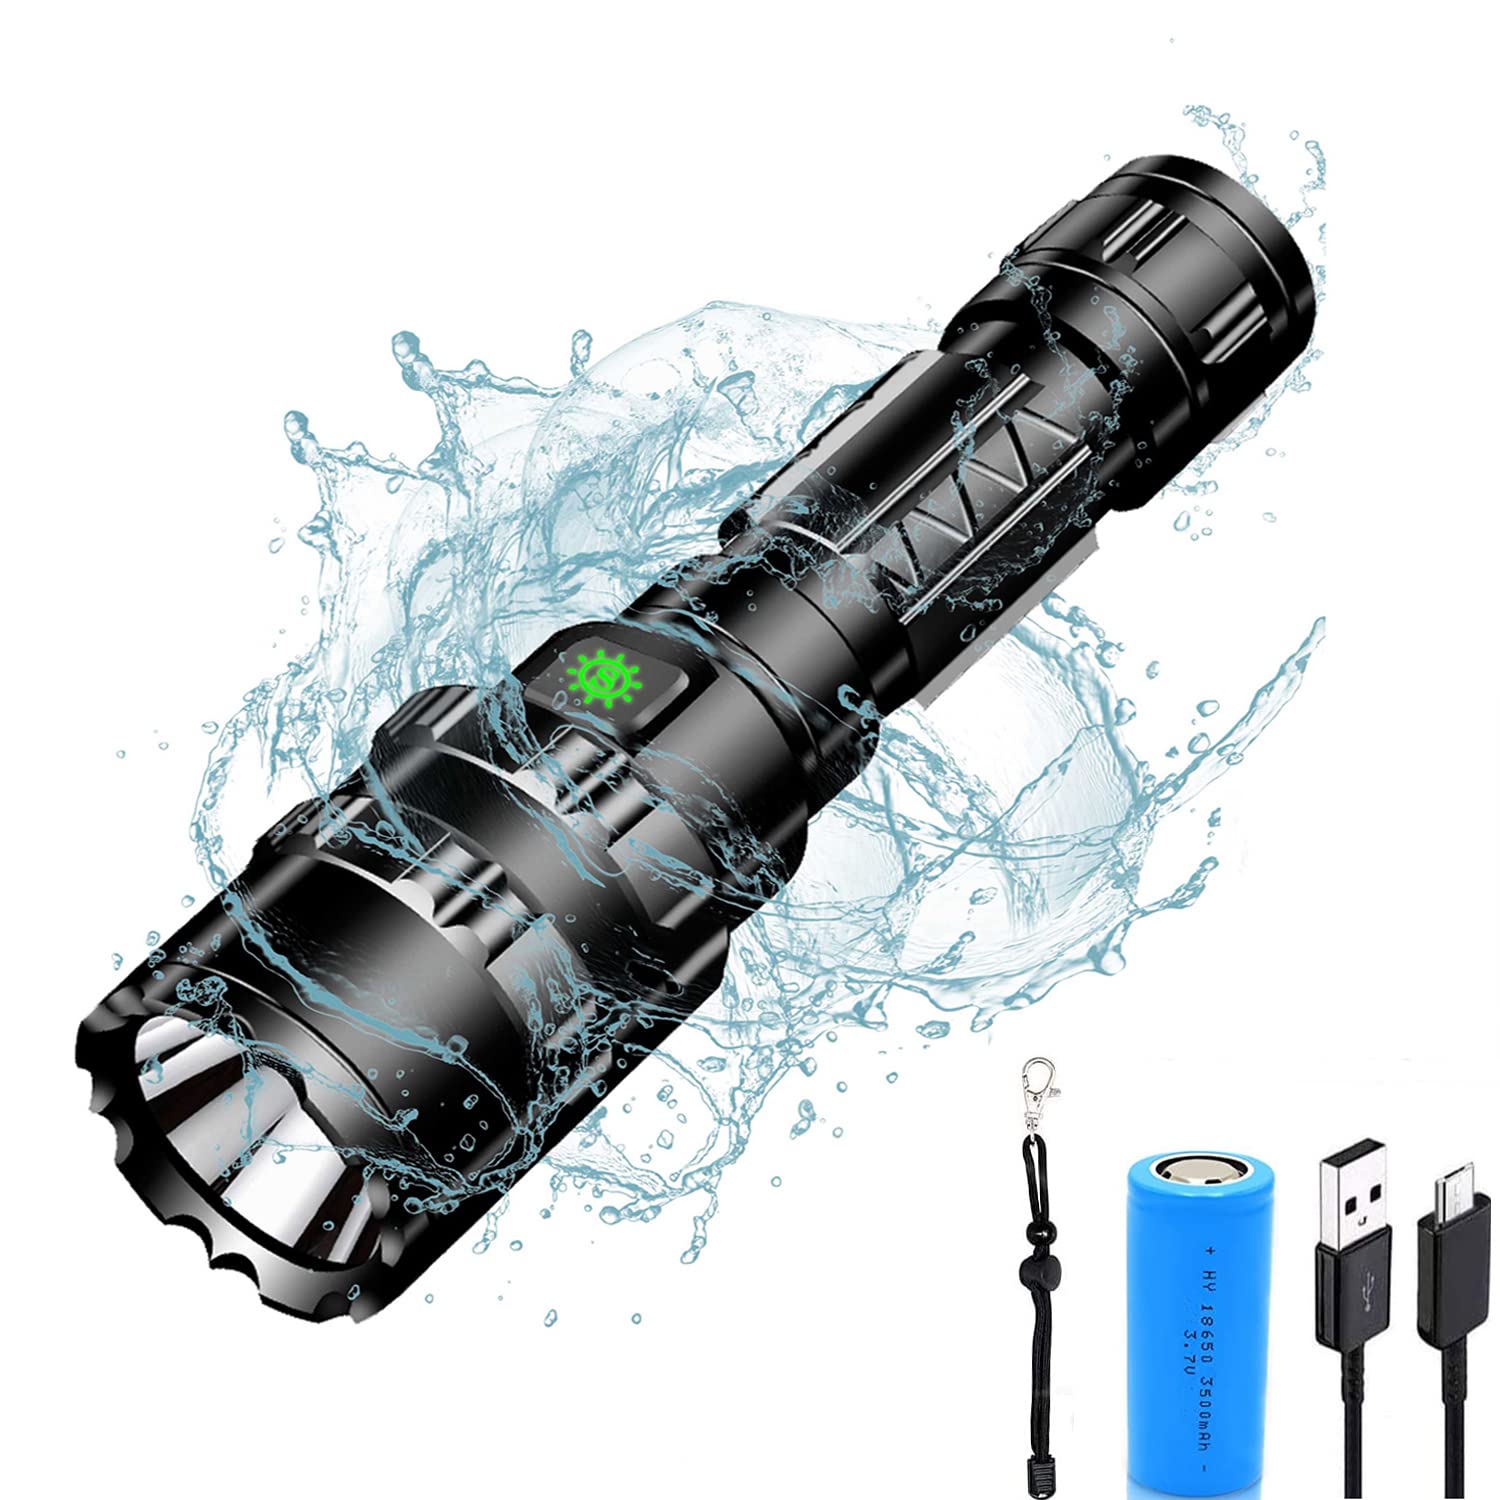 Saitoku Torches Led Super Bright, 3000 Lumens USB Rechargeable Torch, Powerful Tactical LED Flashlight Waterproof Torch 5 Modes for Dog Walking, Hiking, Night Walking